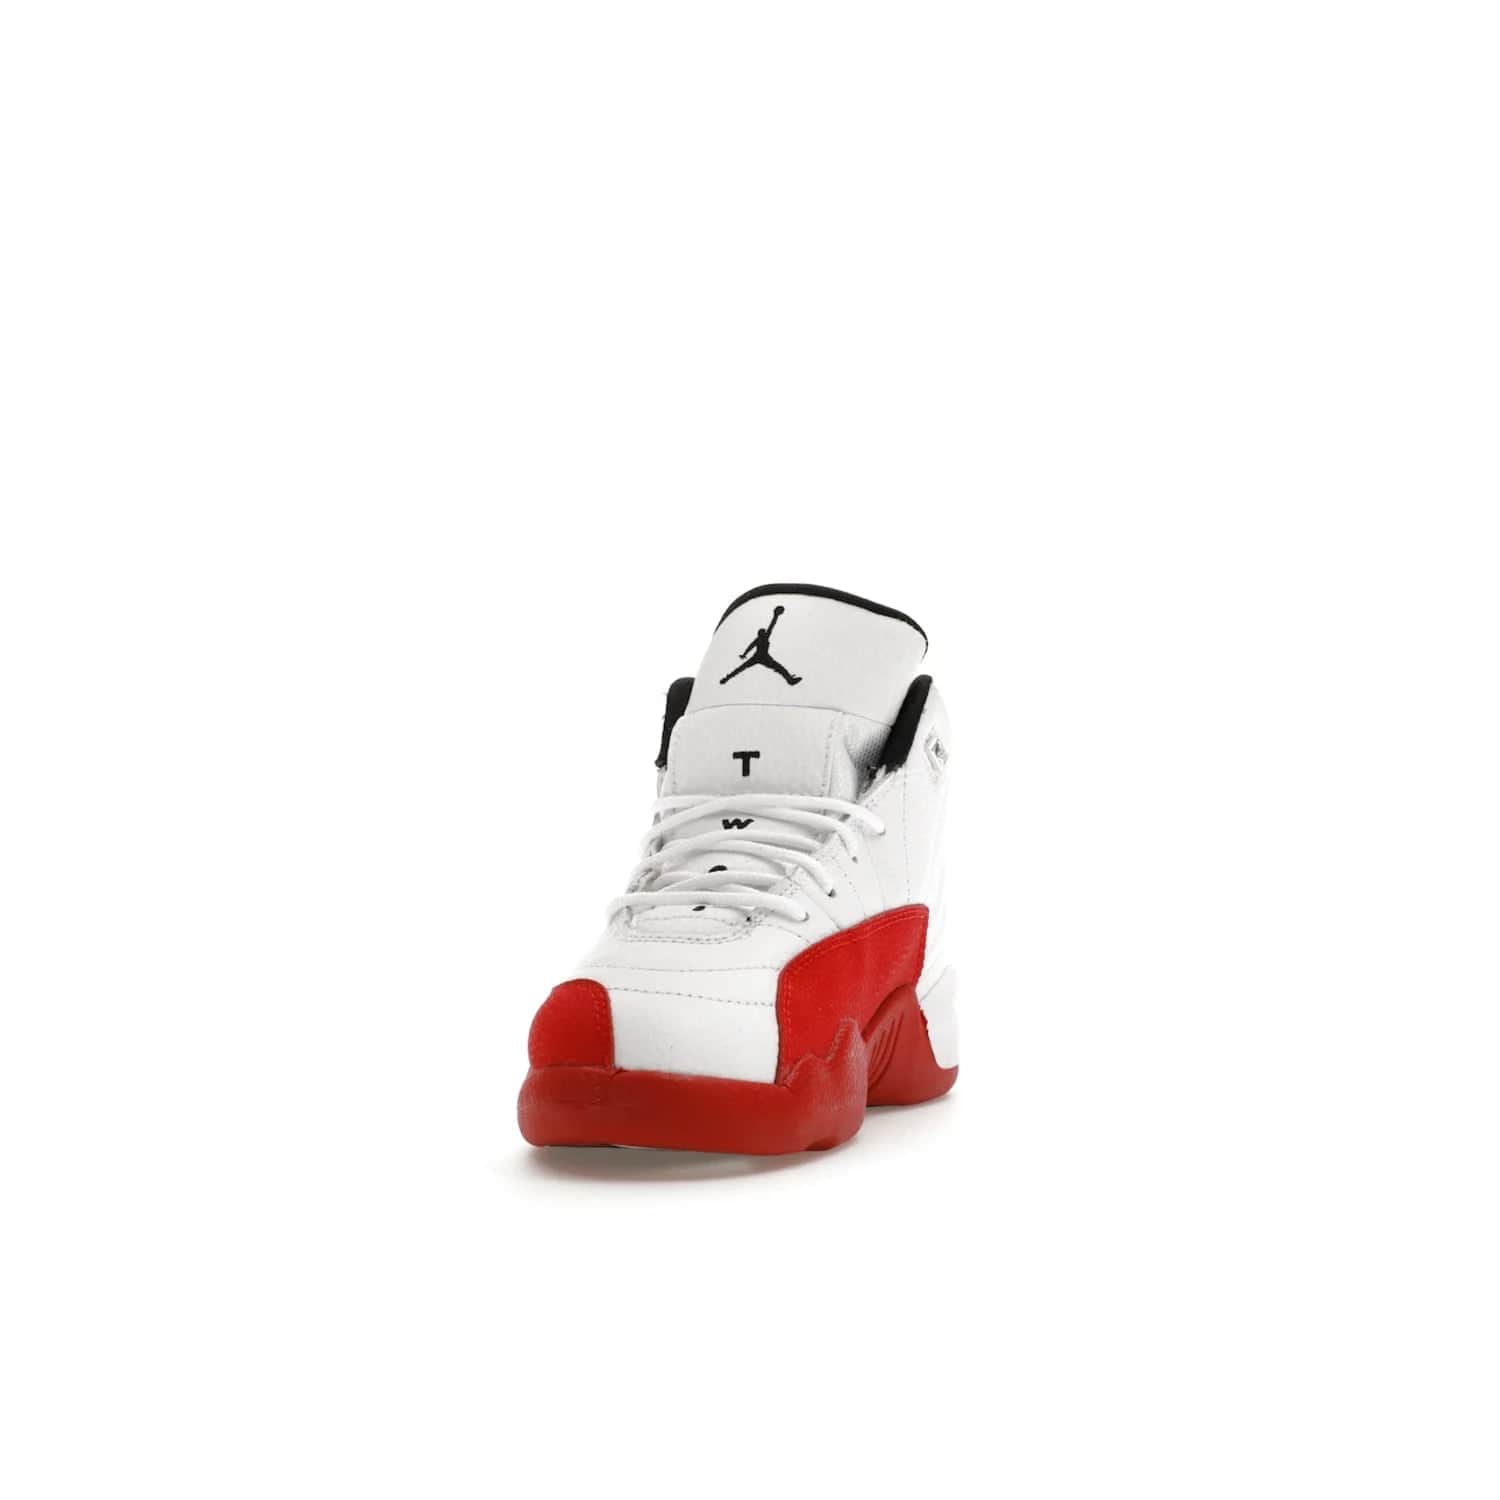 Jordan 12 Retro Cherry (2023) (PS) - Image 12 - Only at www.BallersClubKickz.com - Jordan 12 Retro Cherry dropping for toddlers in 2023! White leather upper with black overlays and red branding. Classic court style for your little one.